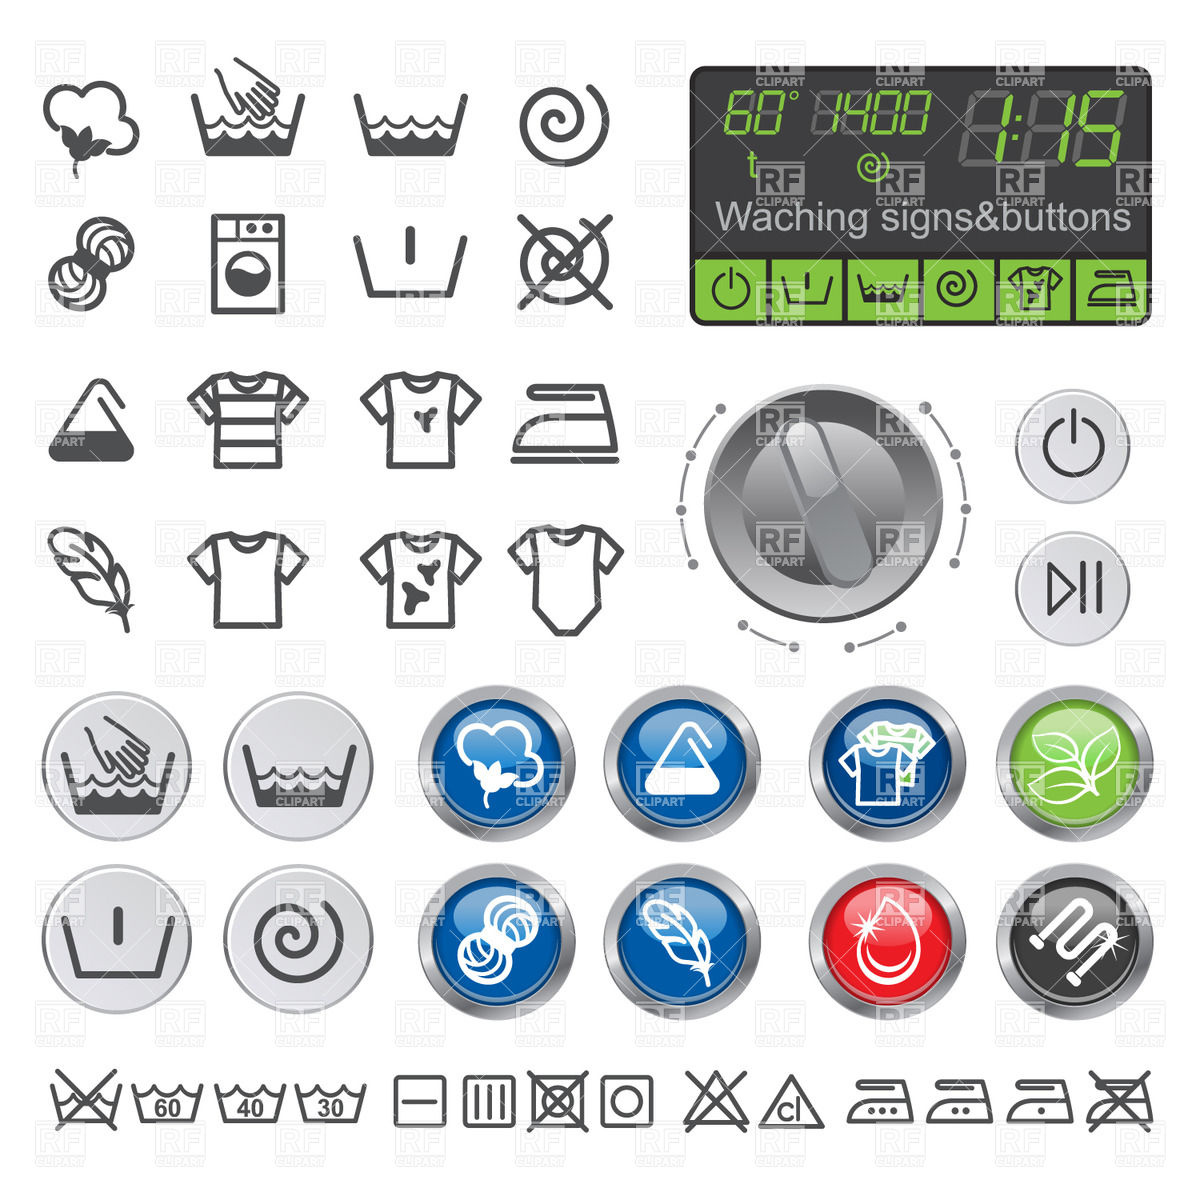     Control Panel   Laundry Icons Download Royalty Free Vector Clipart